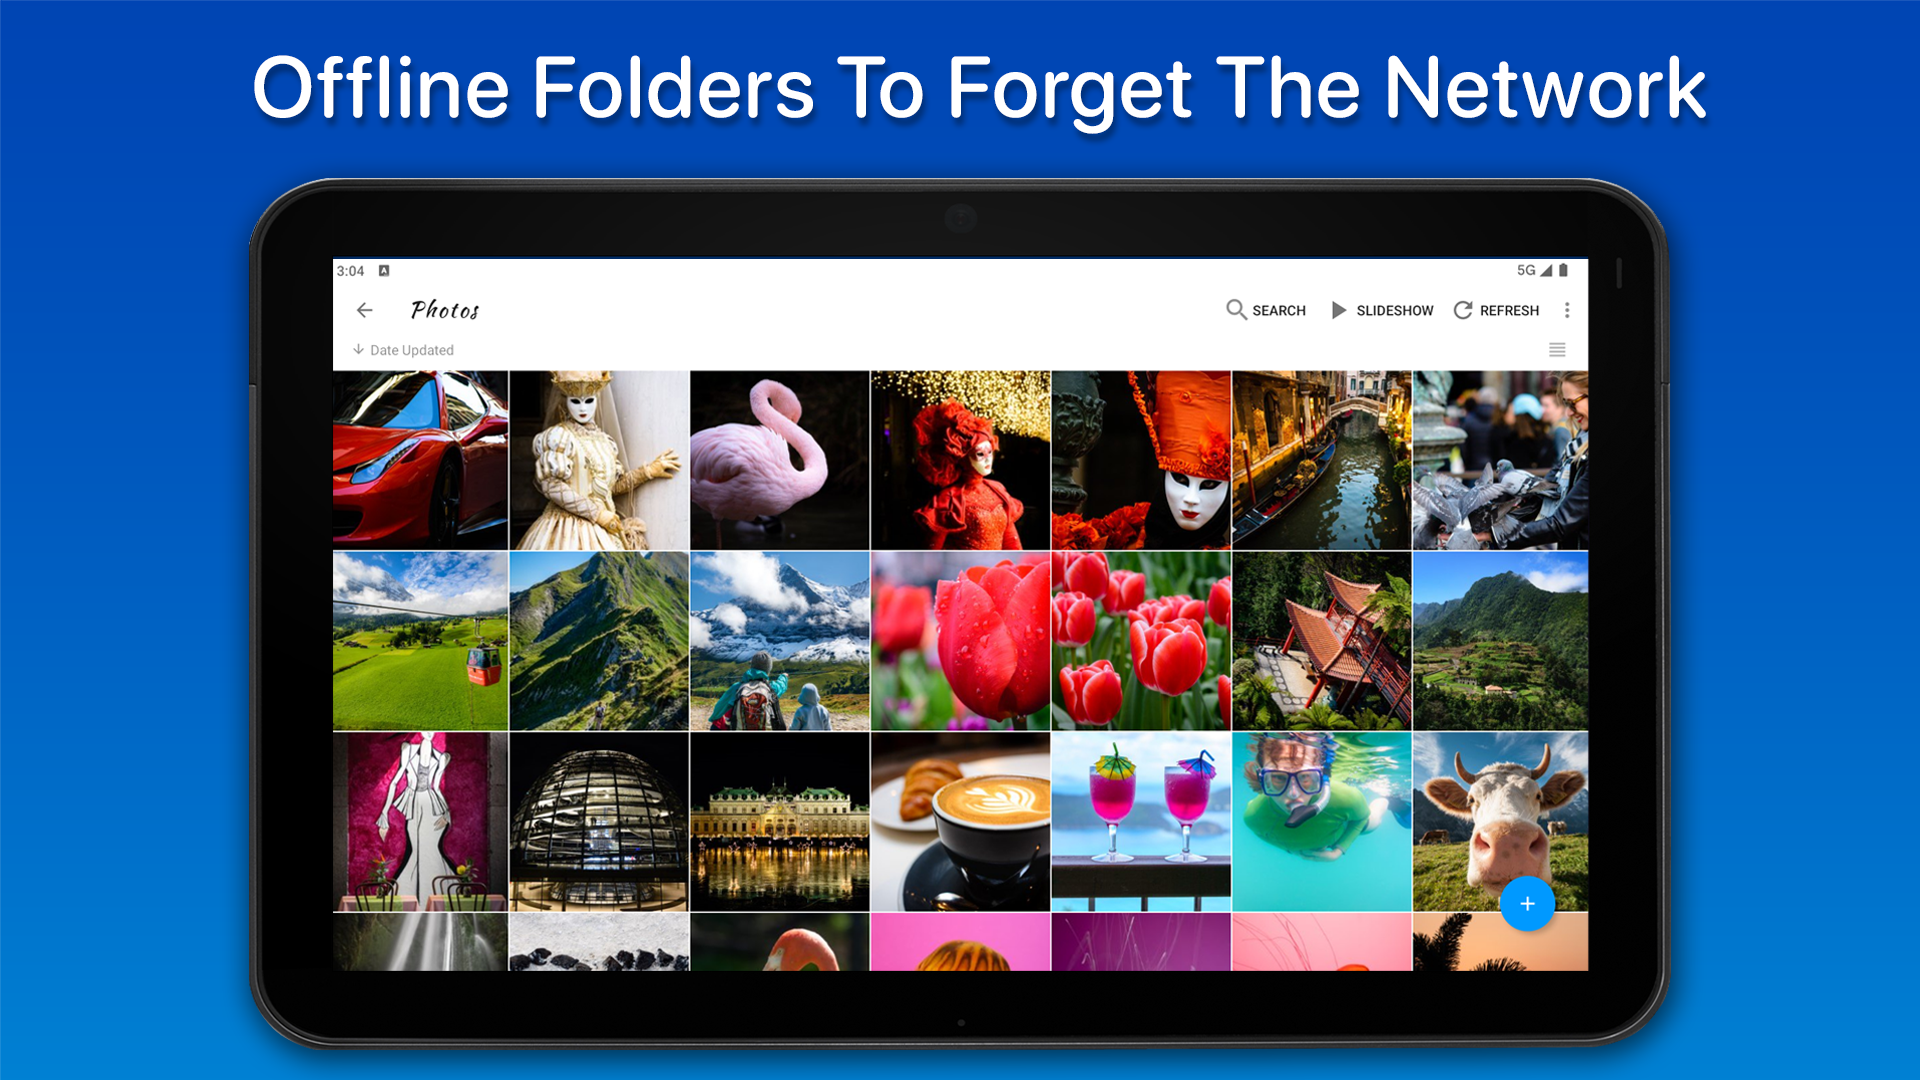 FlickFolio - Flickr Photos & Slideshows:Amazon.co.uk:Appstore for Android